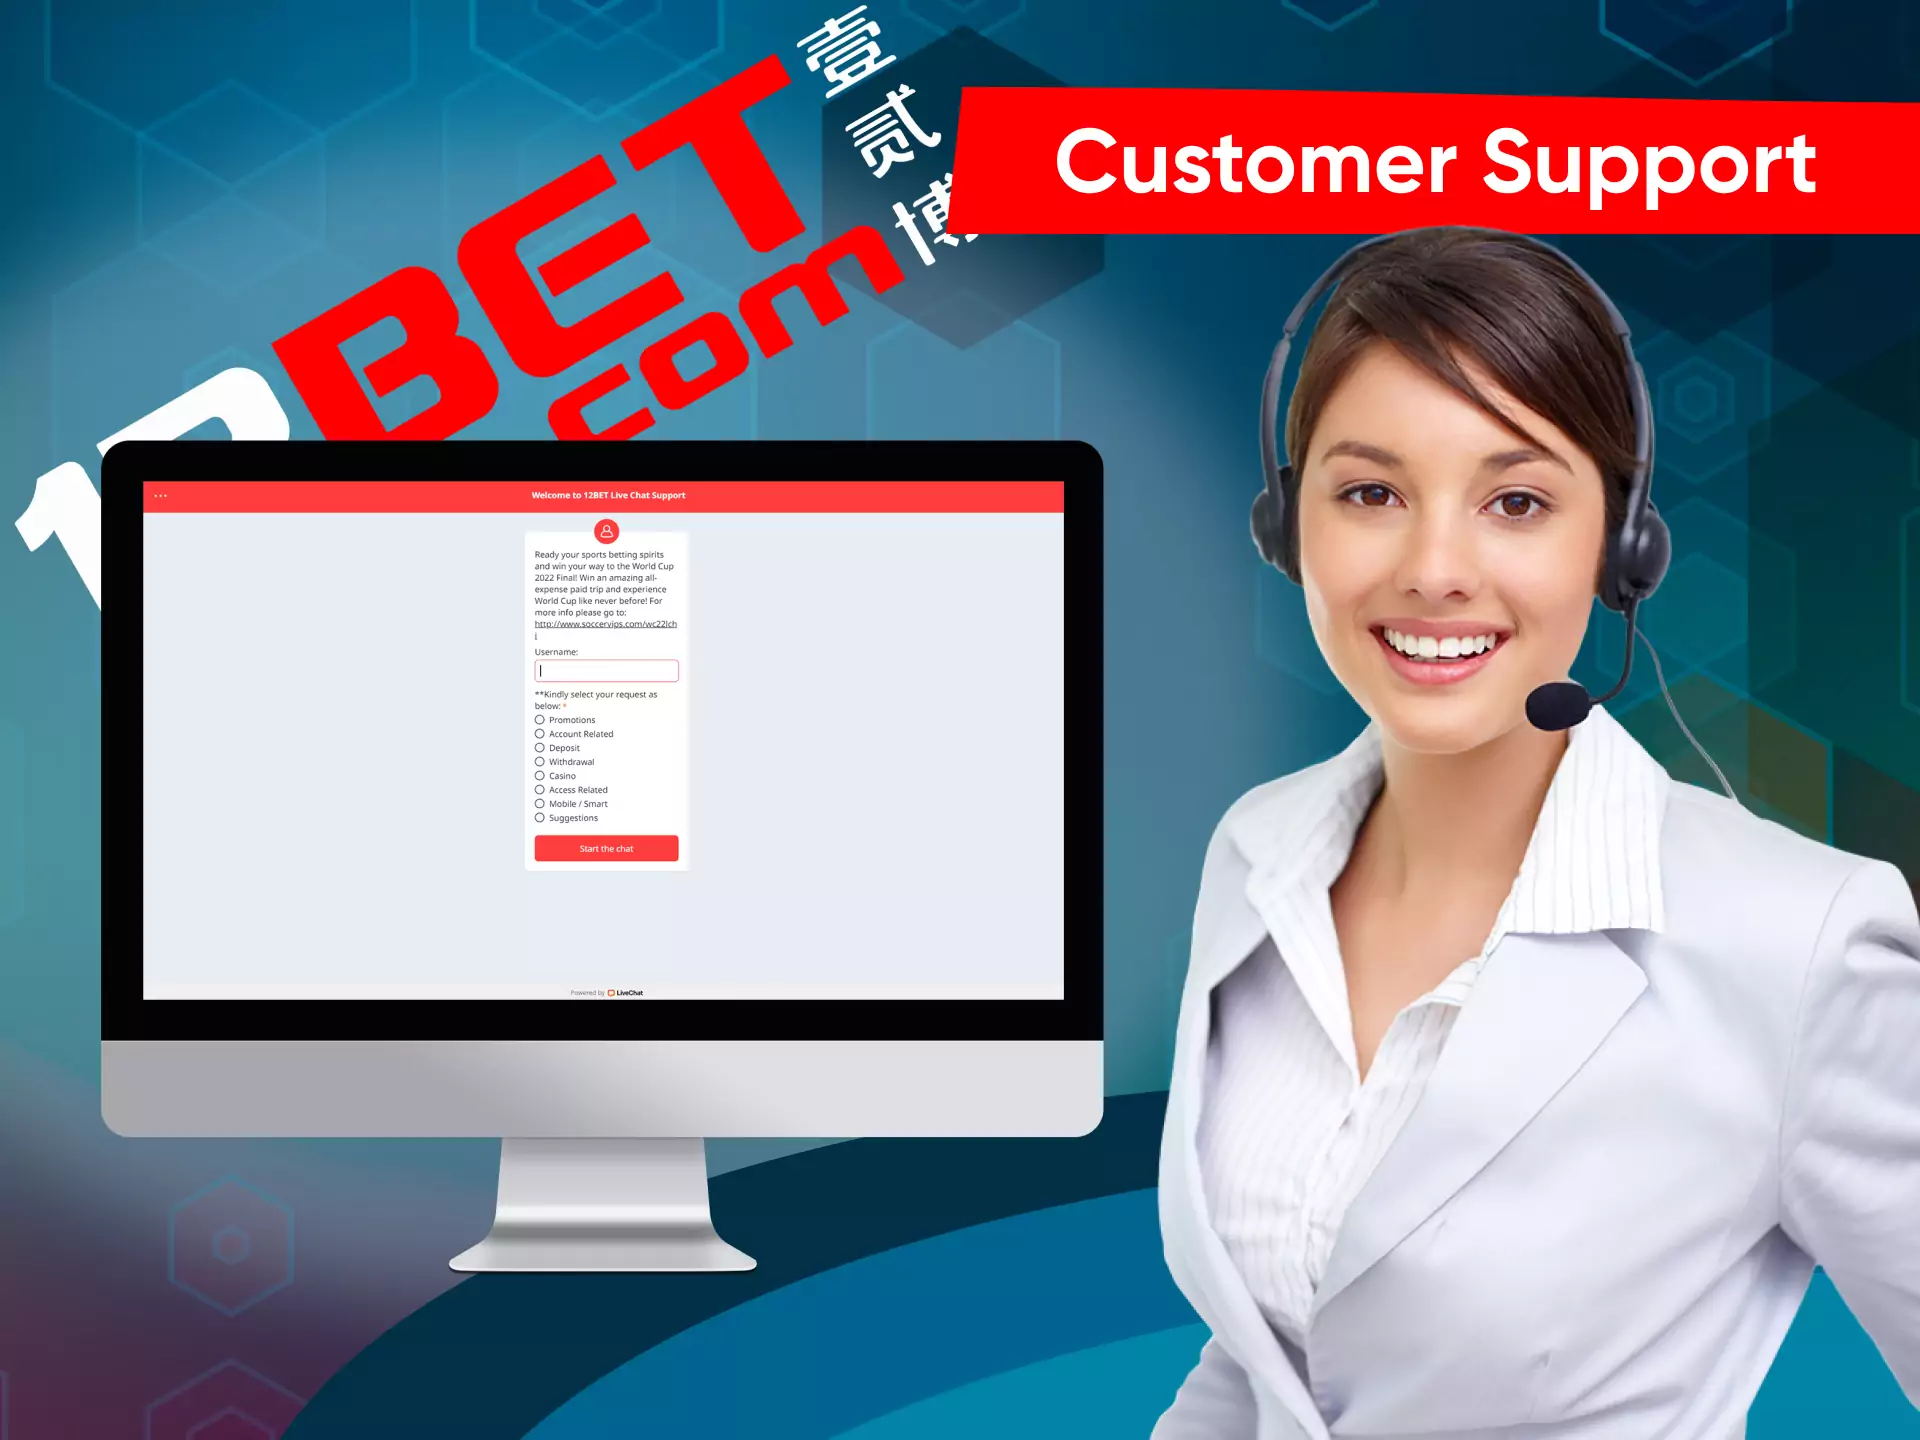 If you have questions, you can ask 12bet customer support anytime.